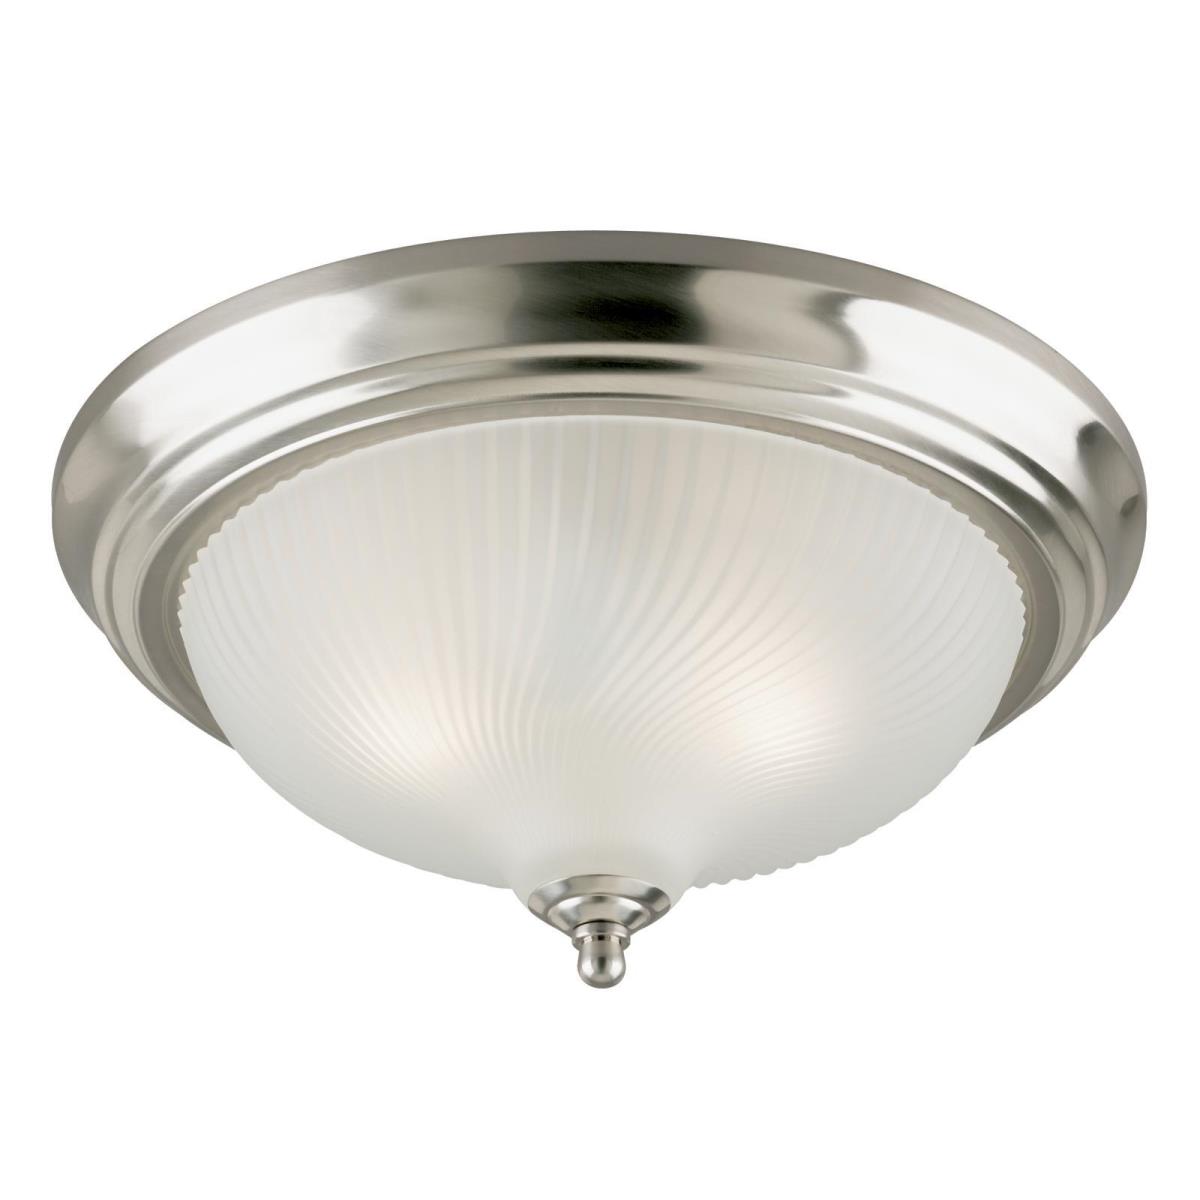 2 Light Flush Brushed Nickel Finish with Frosted Swirl Glass